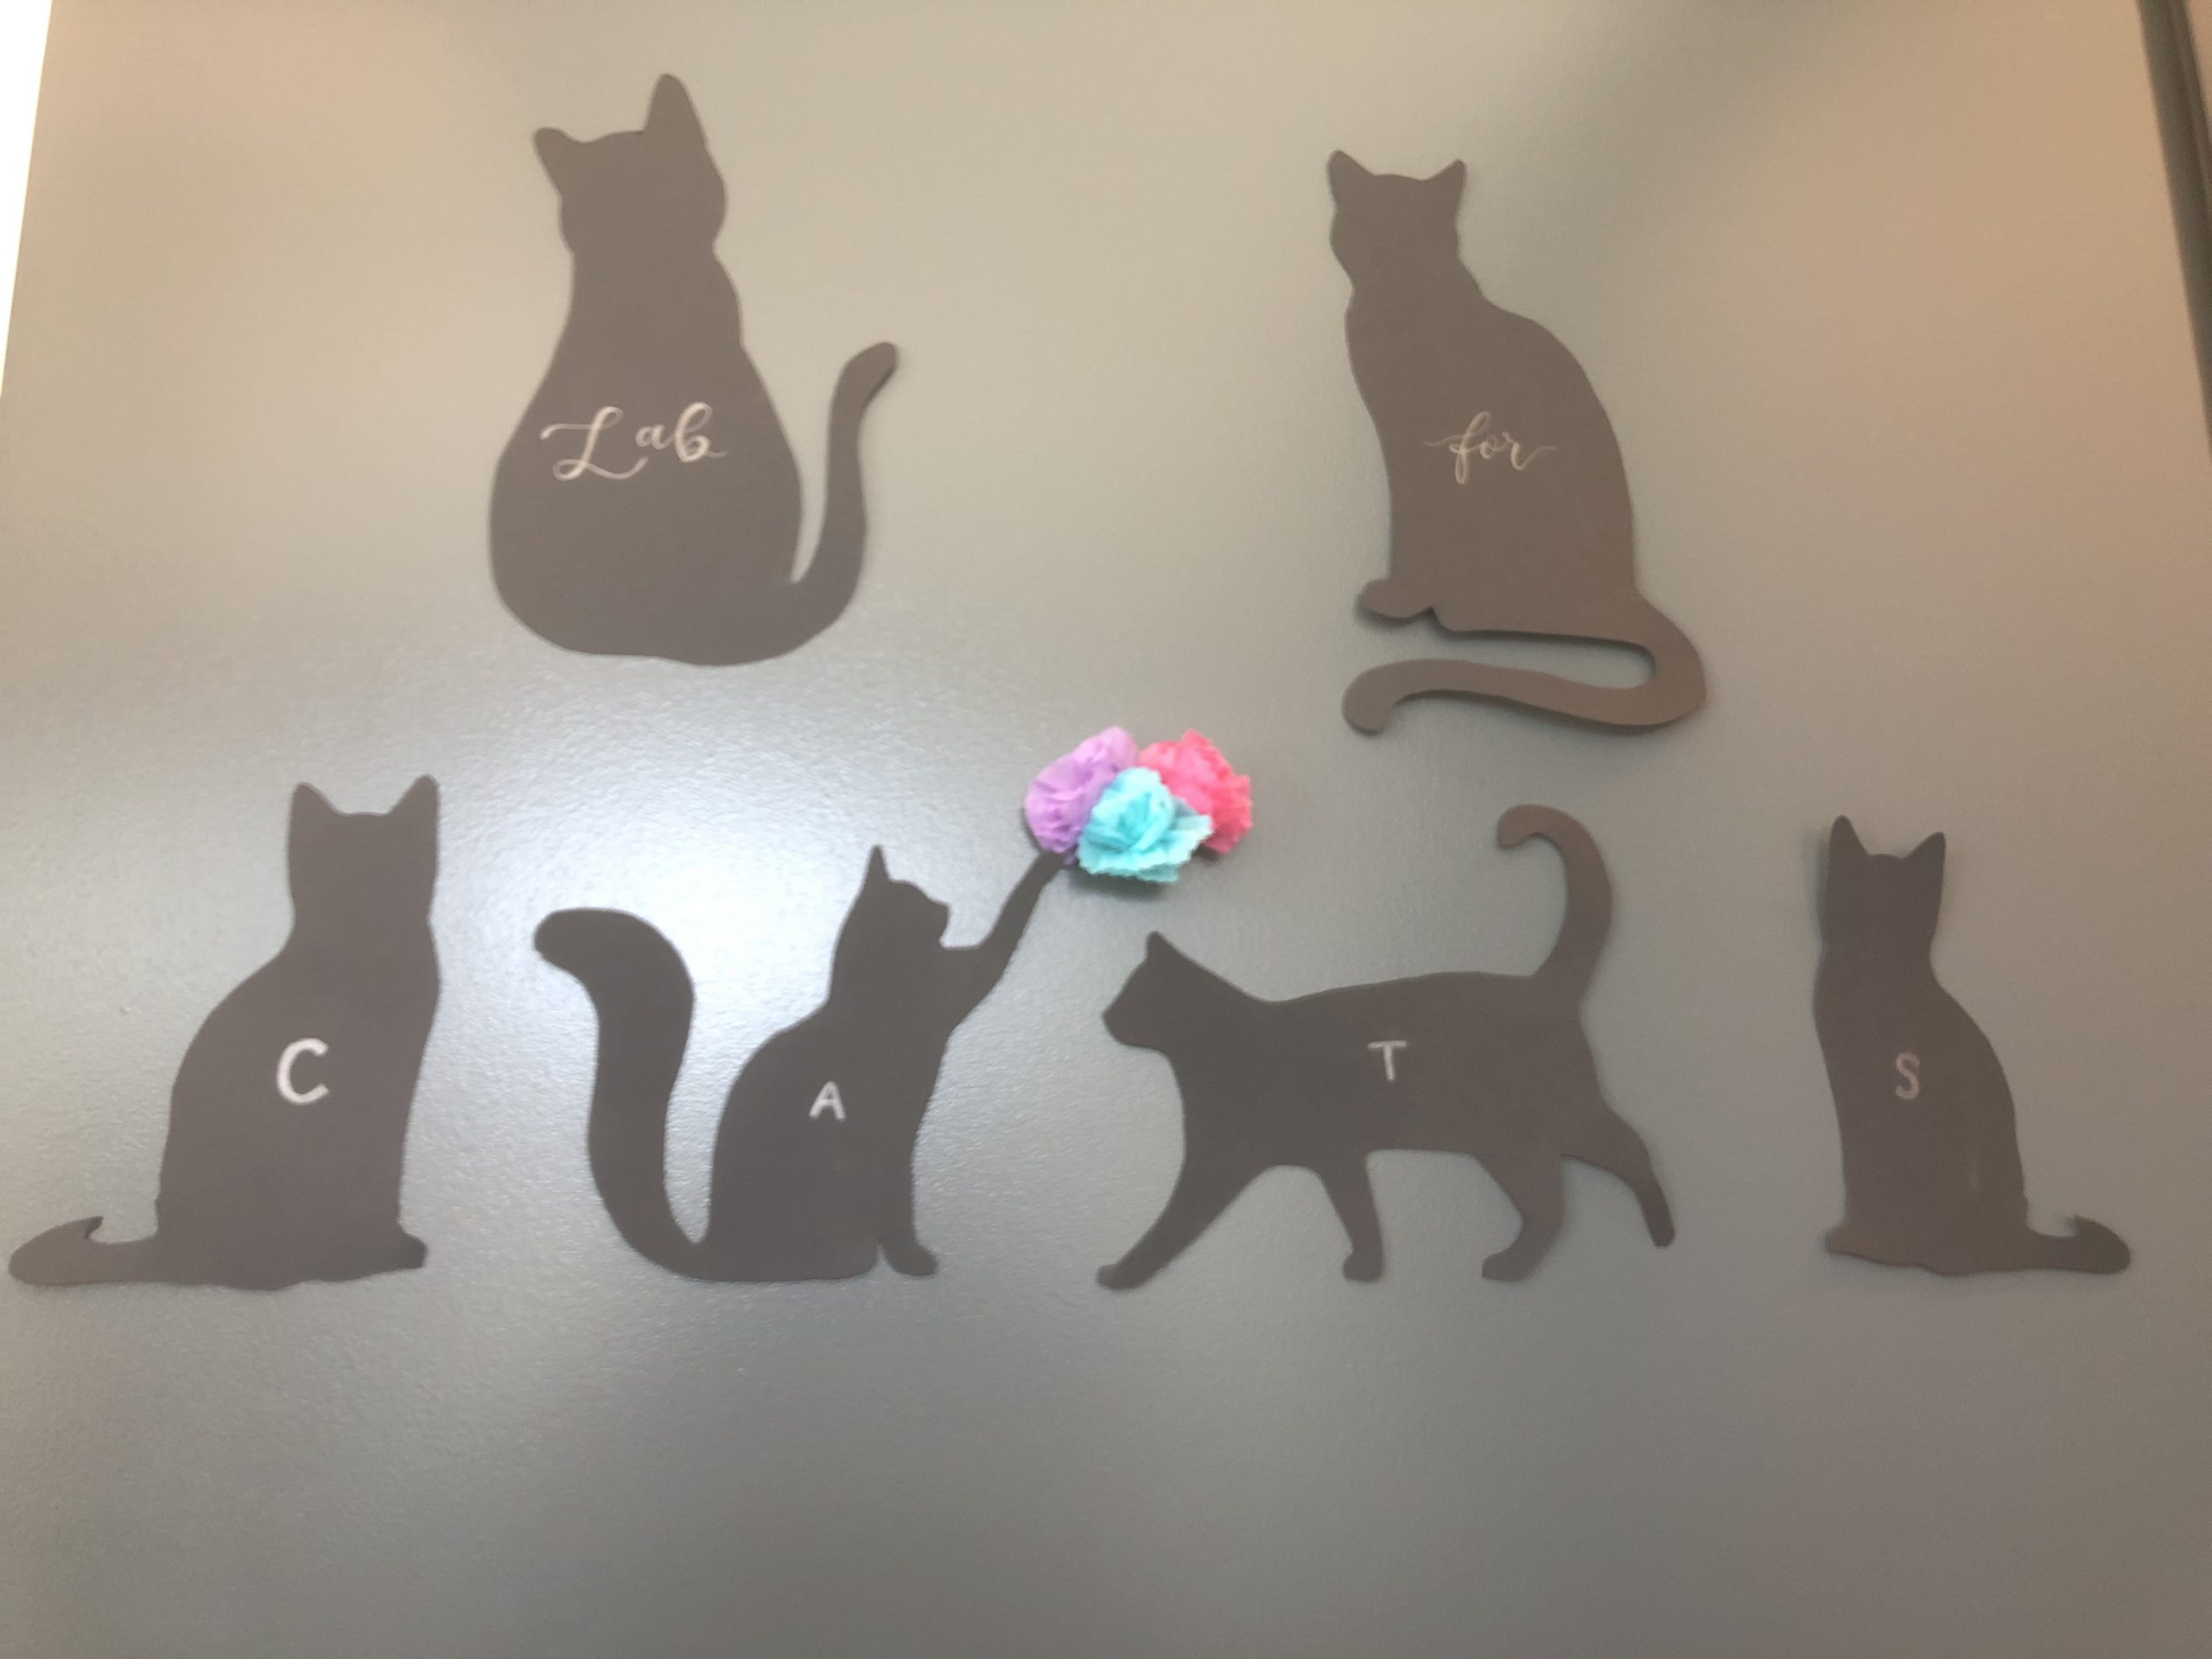 Six cats spelling Lab for CATS on a door